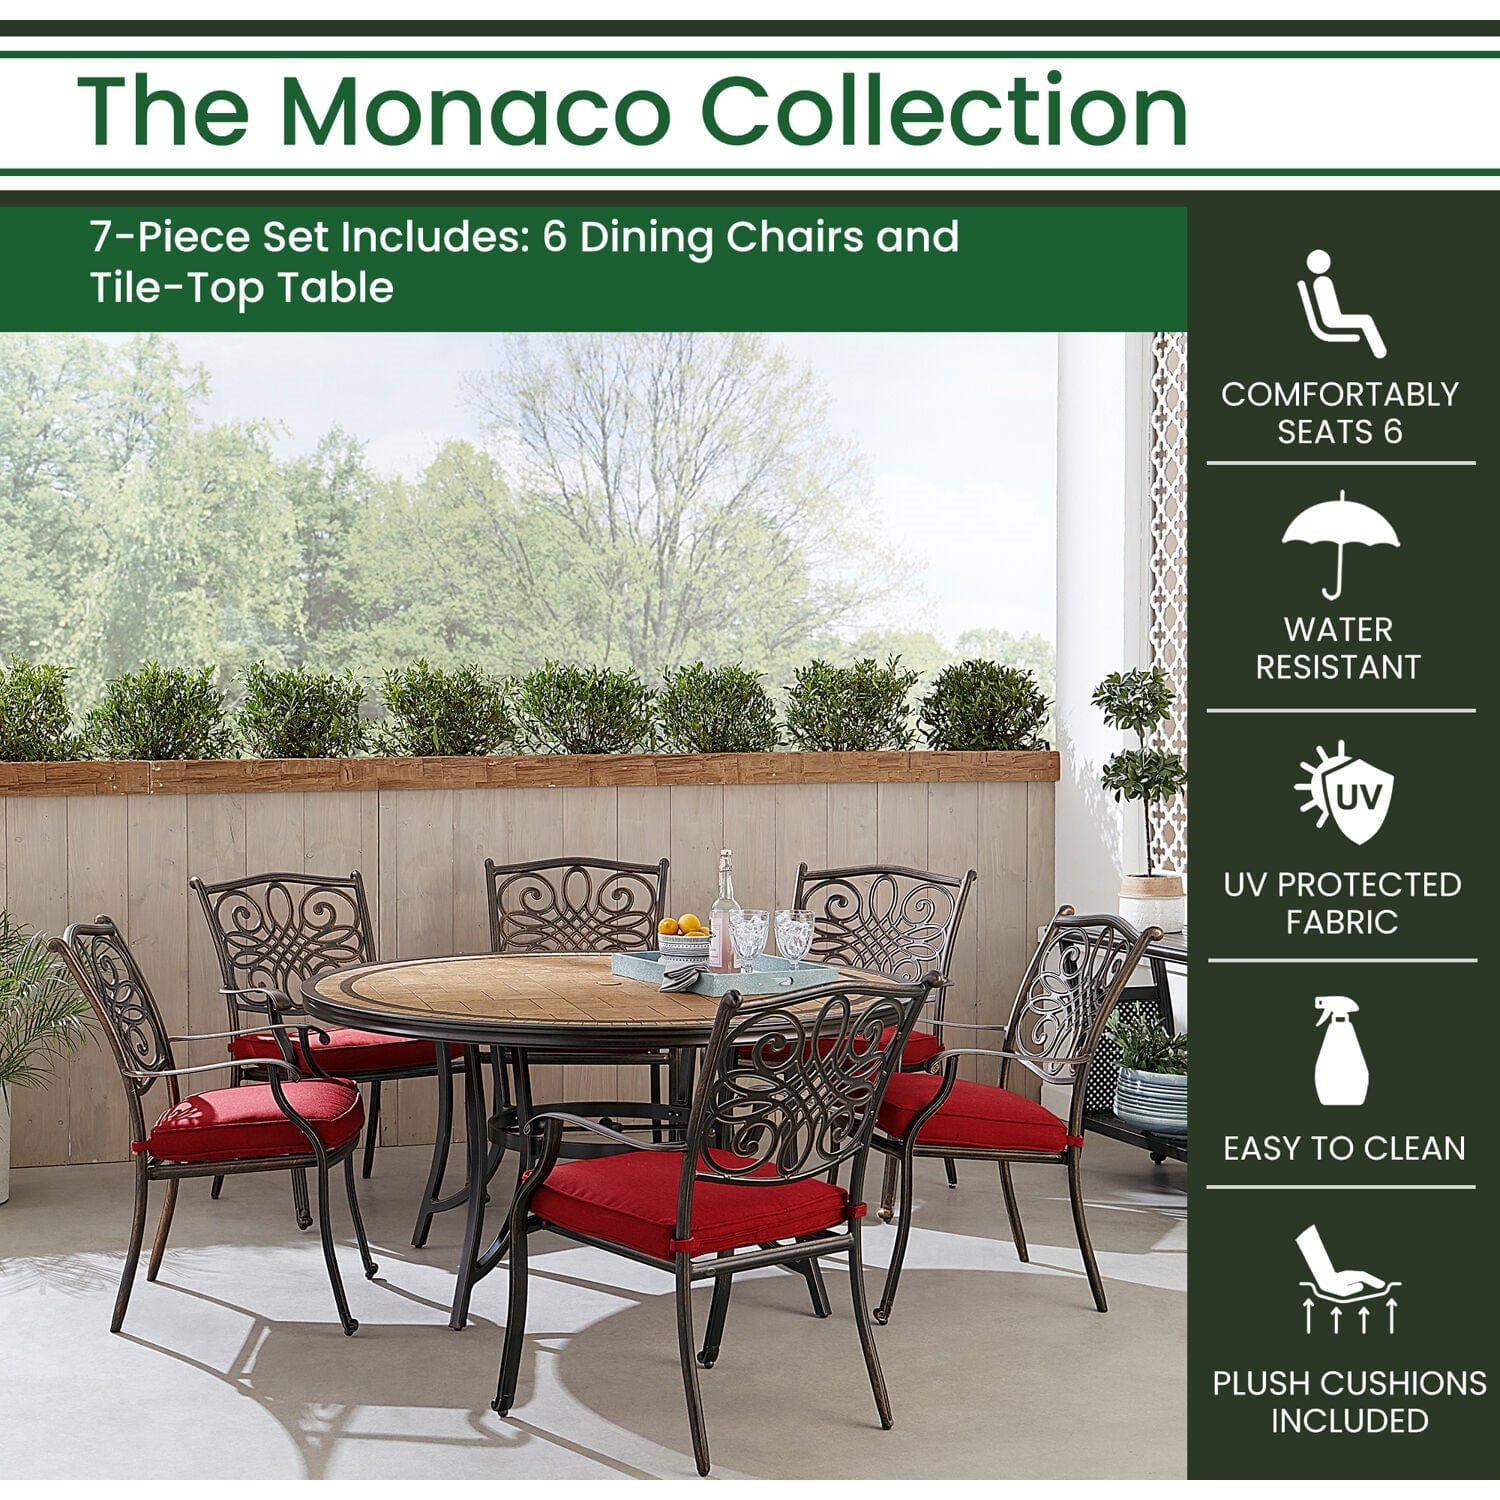 Hanover Outdoor Dining Set Hanover Monaco 7-Piece Dining Set in Red with Six Dining Chairs and a 60-in. Tile-Top Table | MONDN7PCRDTL-C-RED